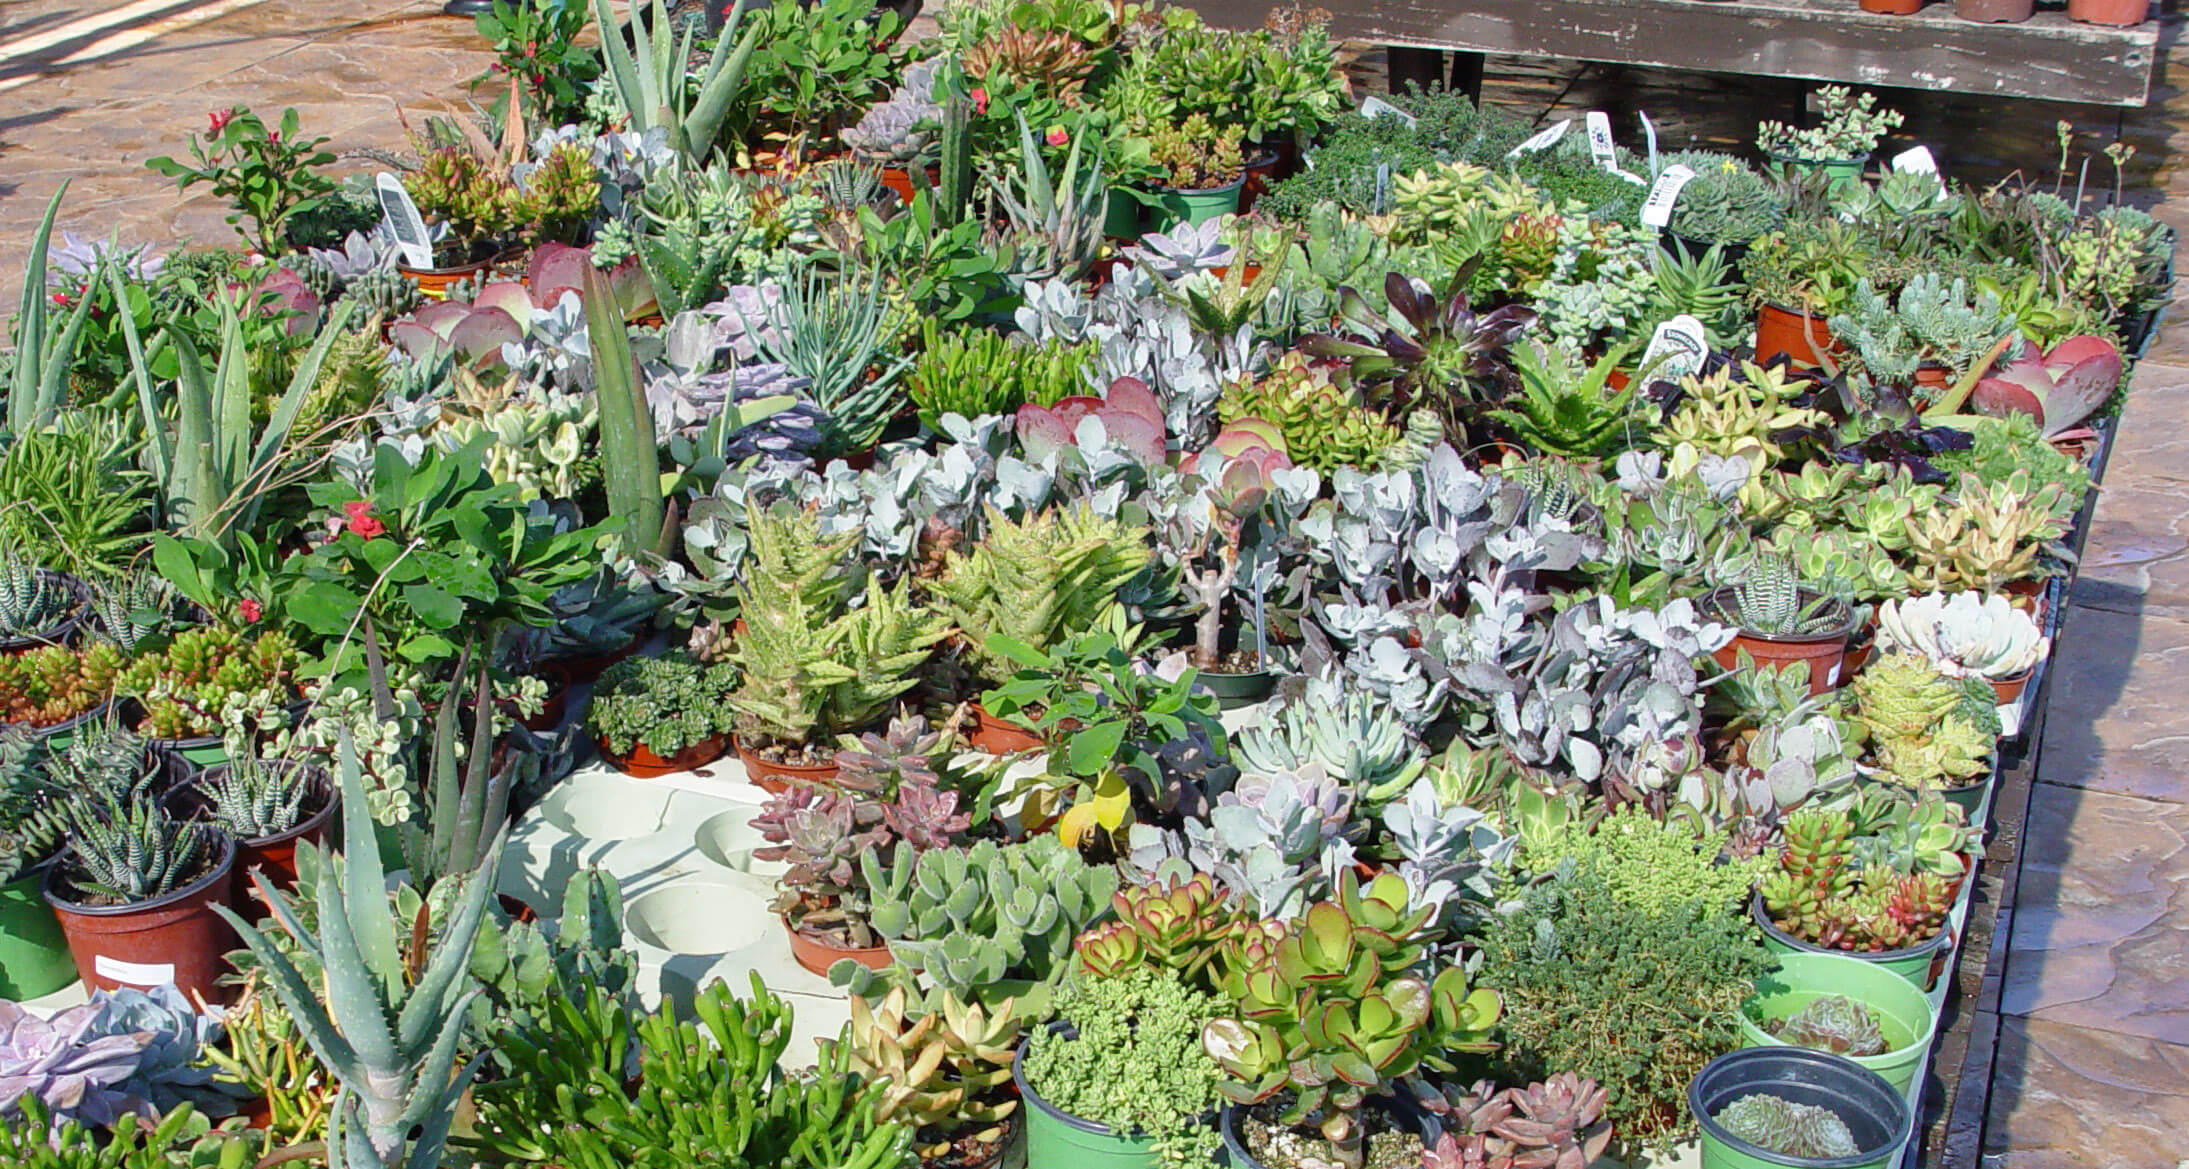 Succulent wreaths deconstruct into a broad collection of these smaller succulent forms and hues.